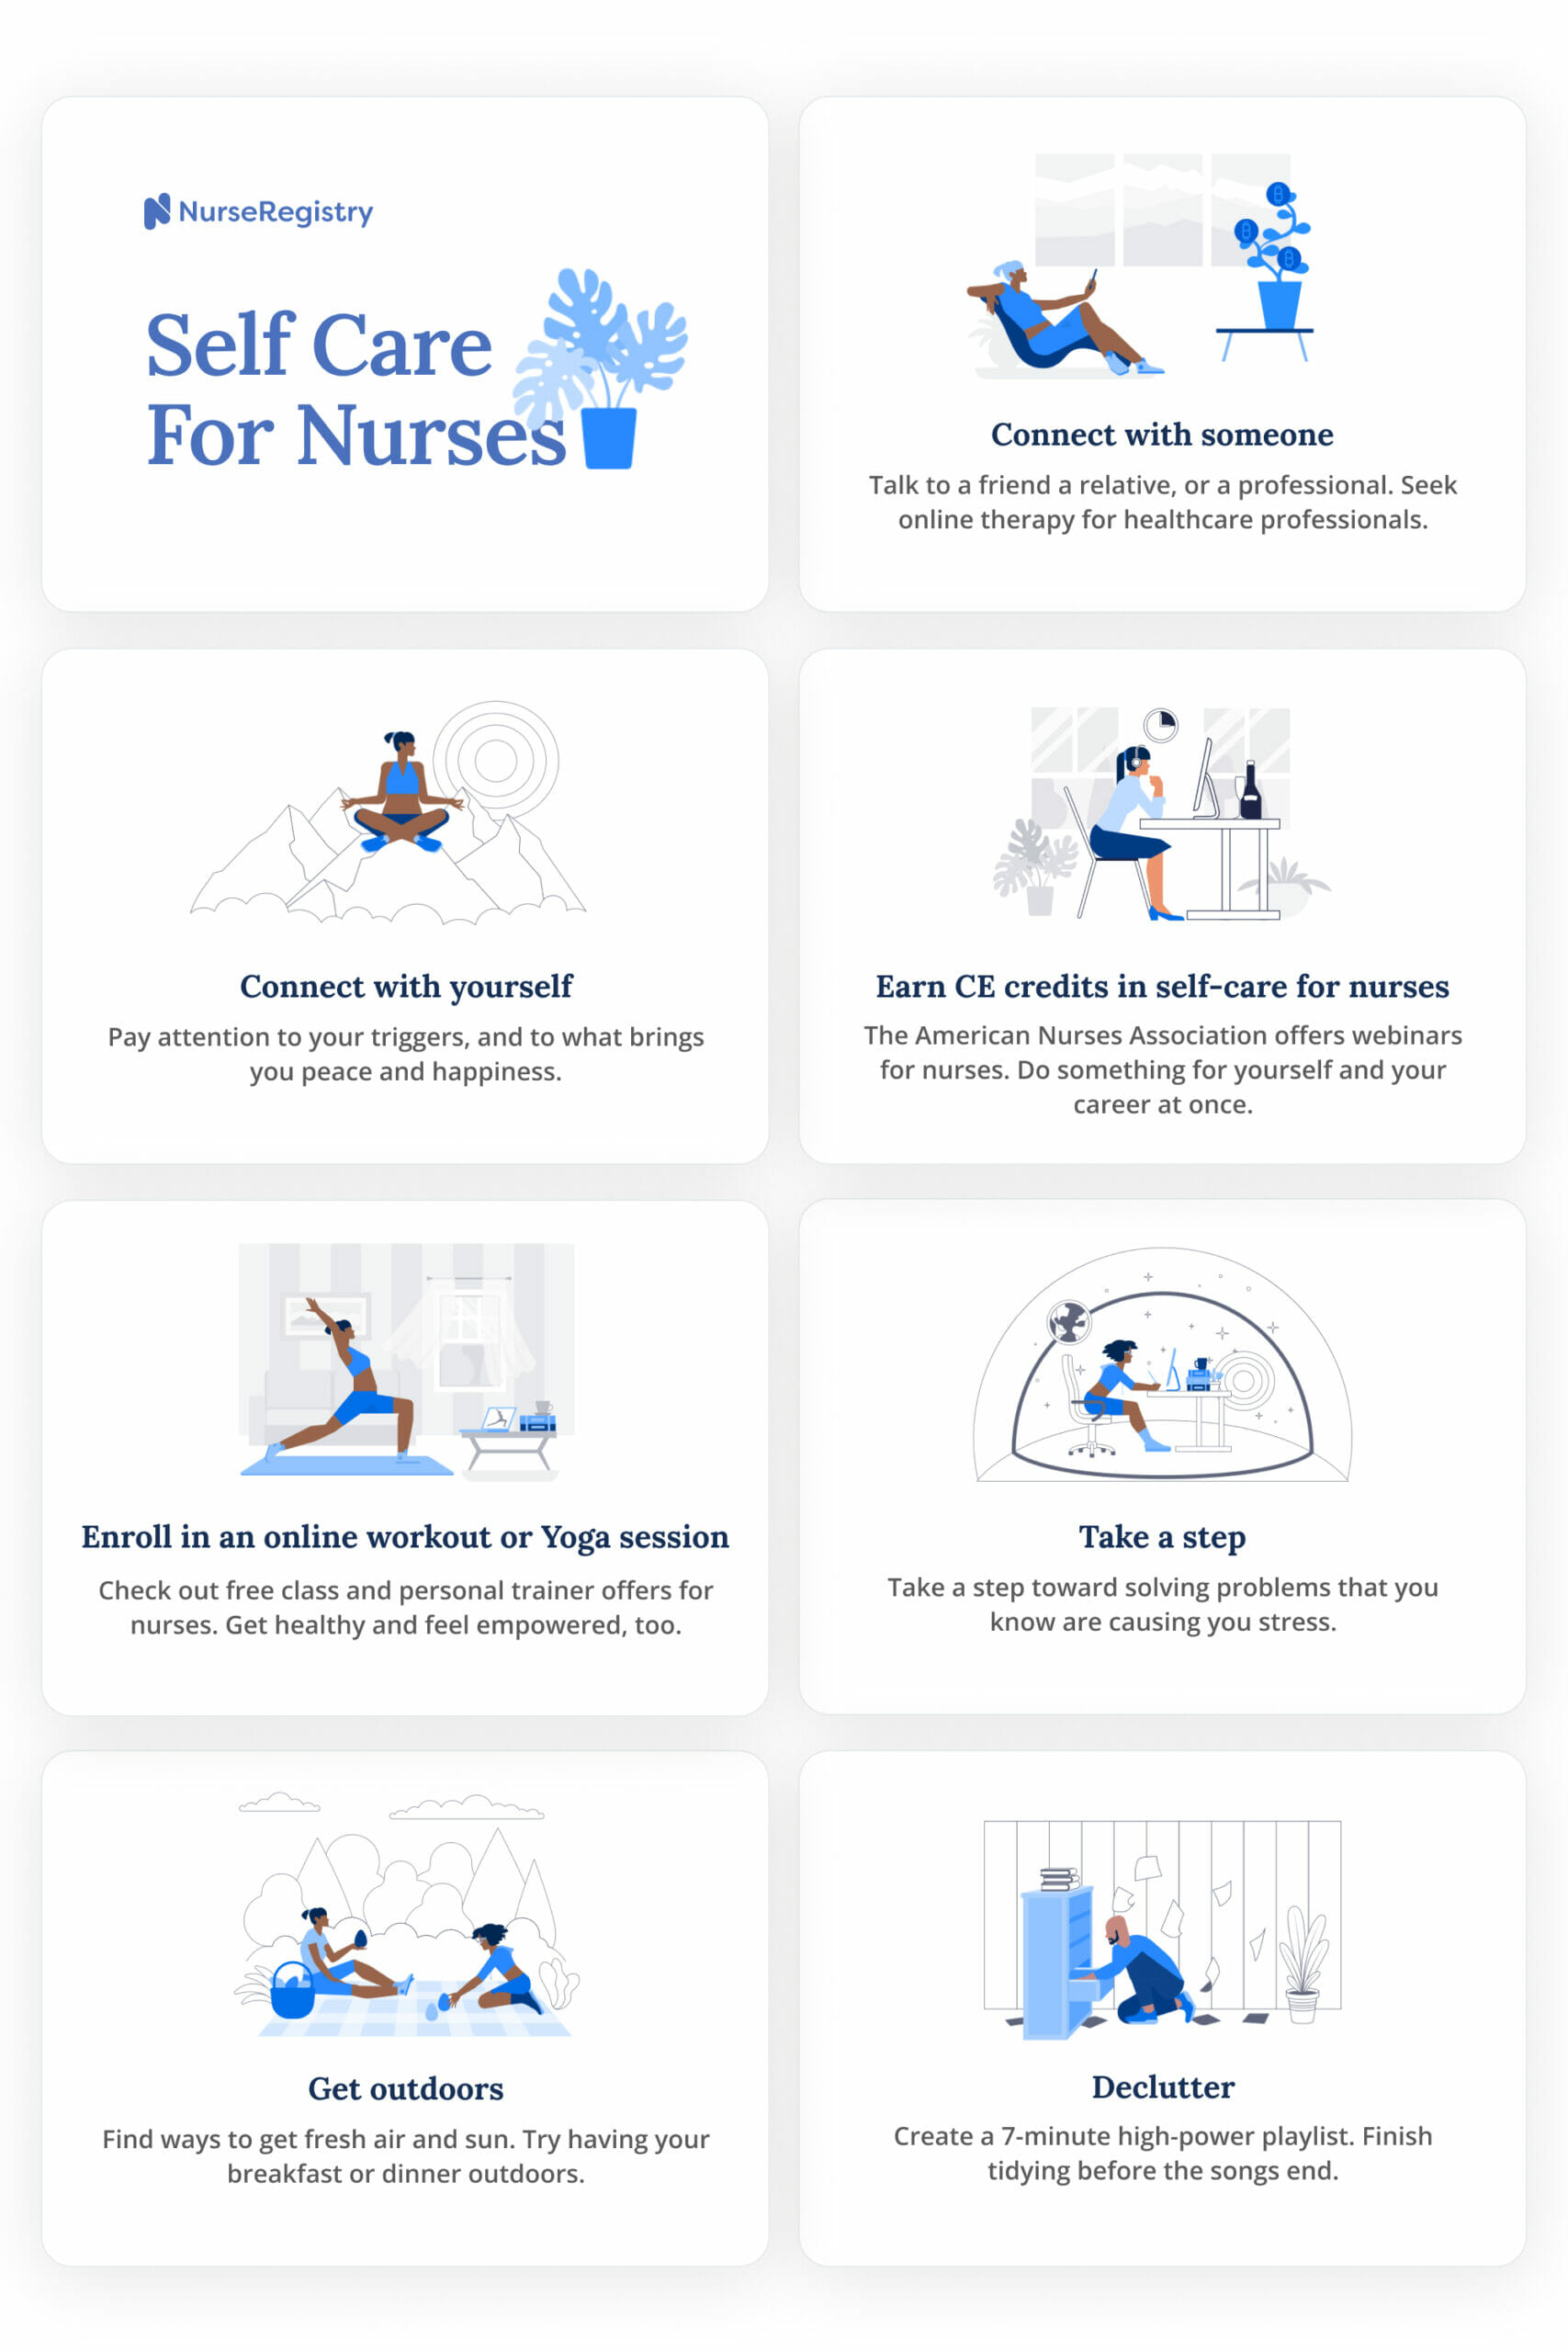 Is Nursing For Me? 8 Signs Nursing Might Be Your Calling